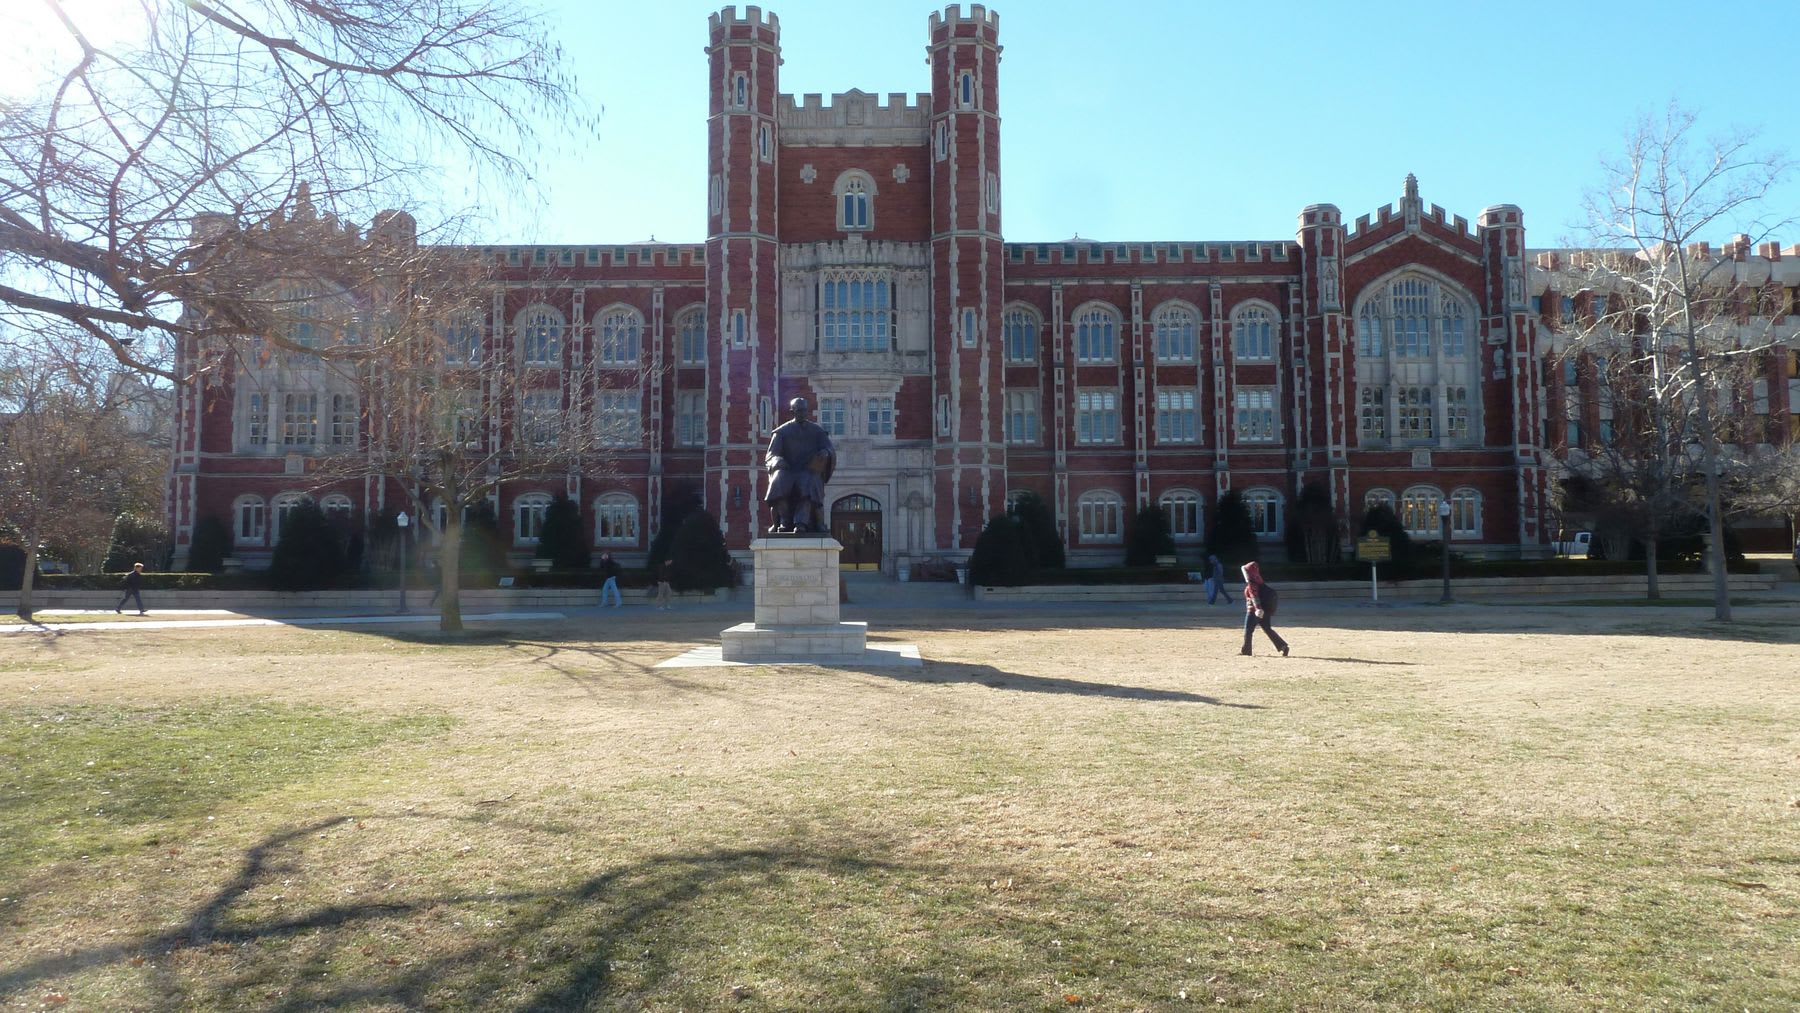 Students walking around the campus grounds of University of Oklahoma